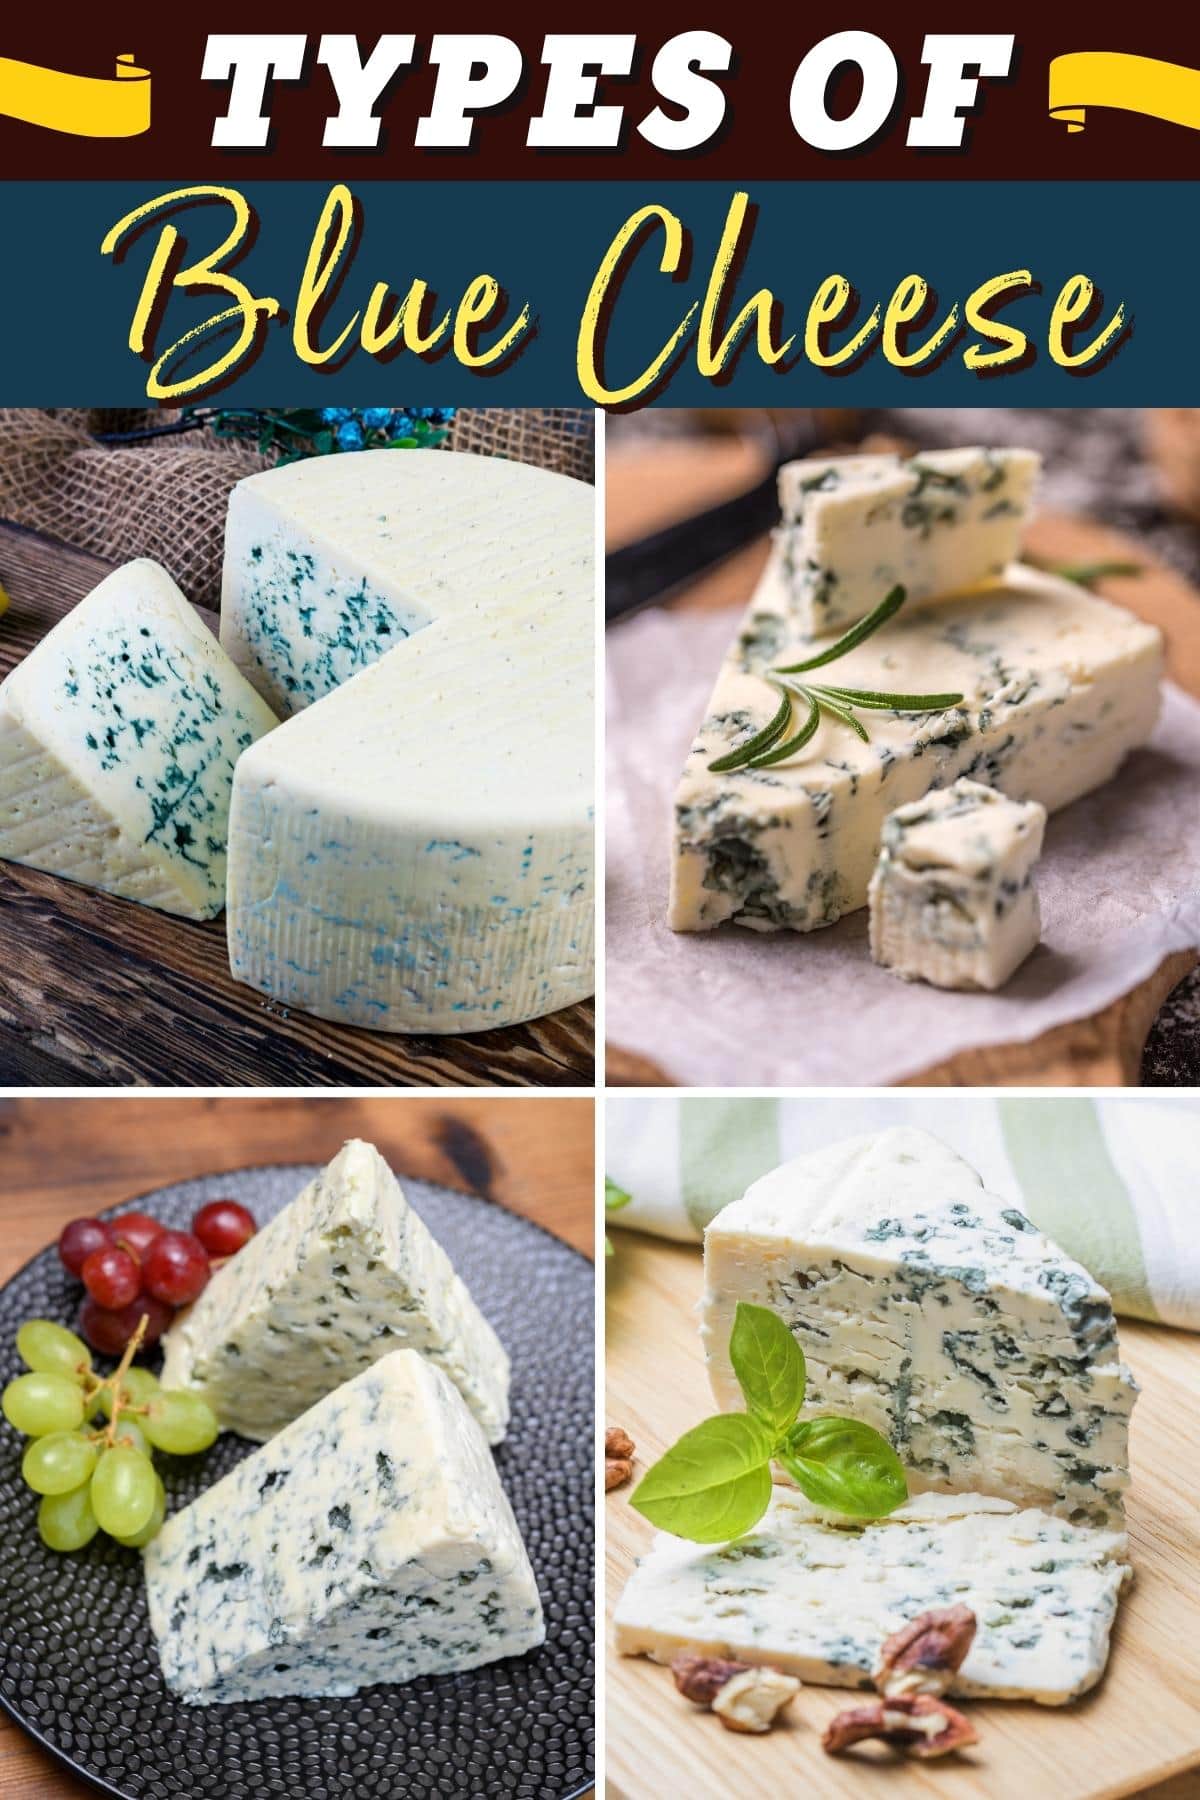 Types of Blue Cheese